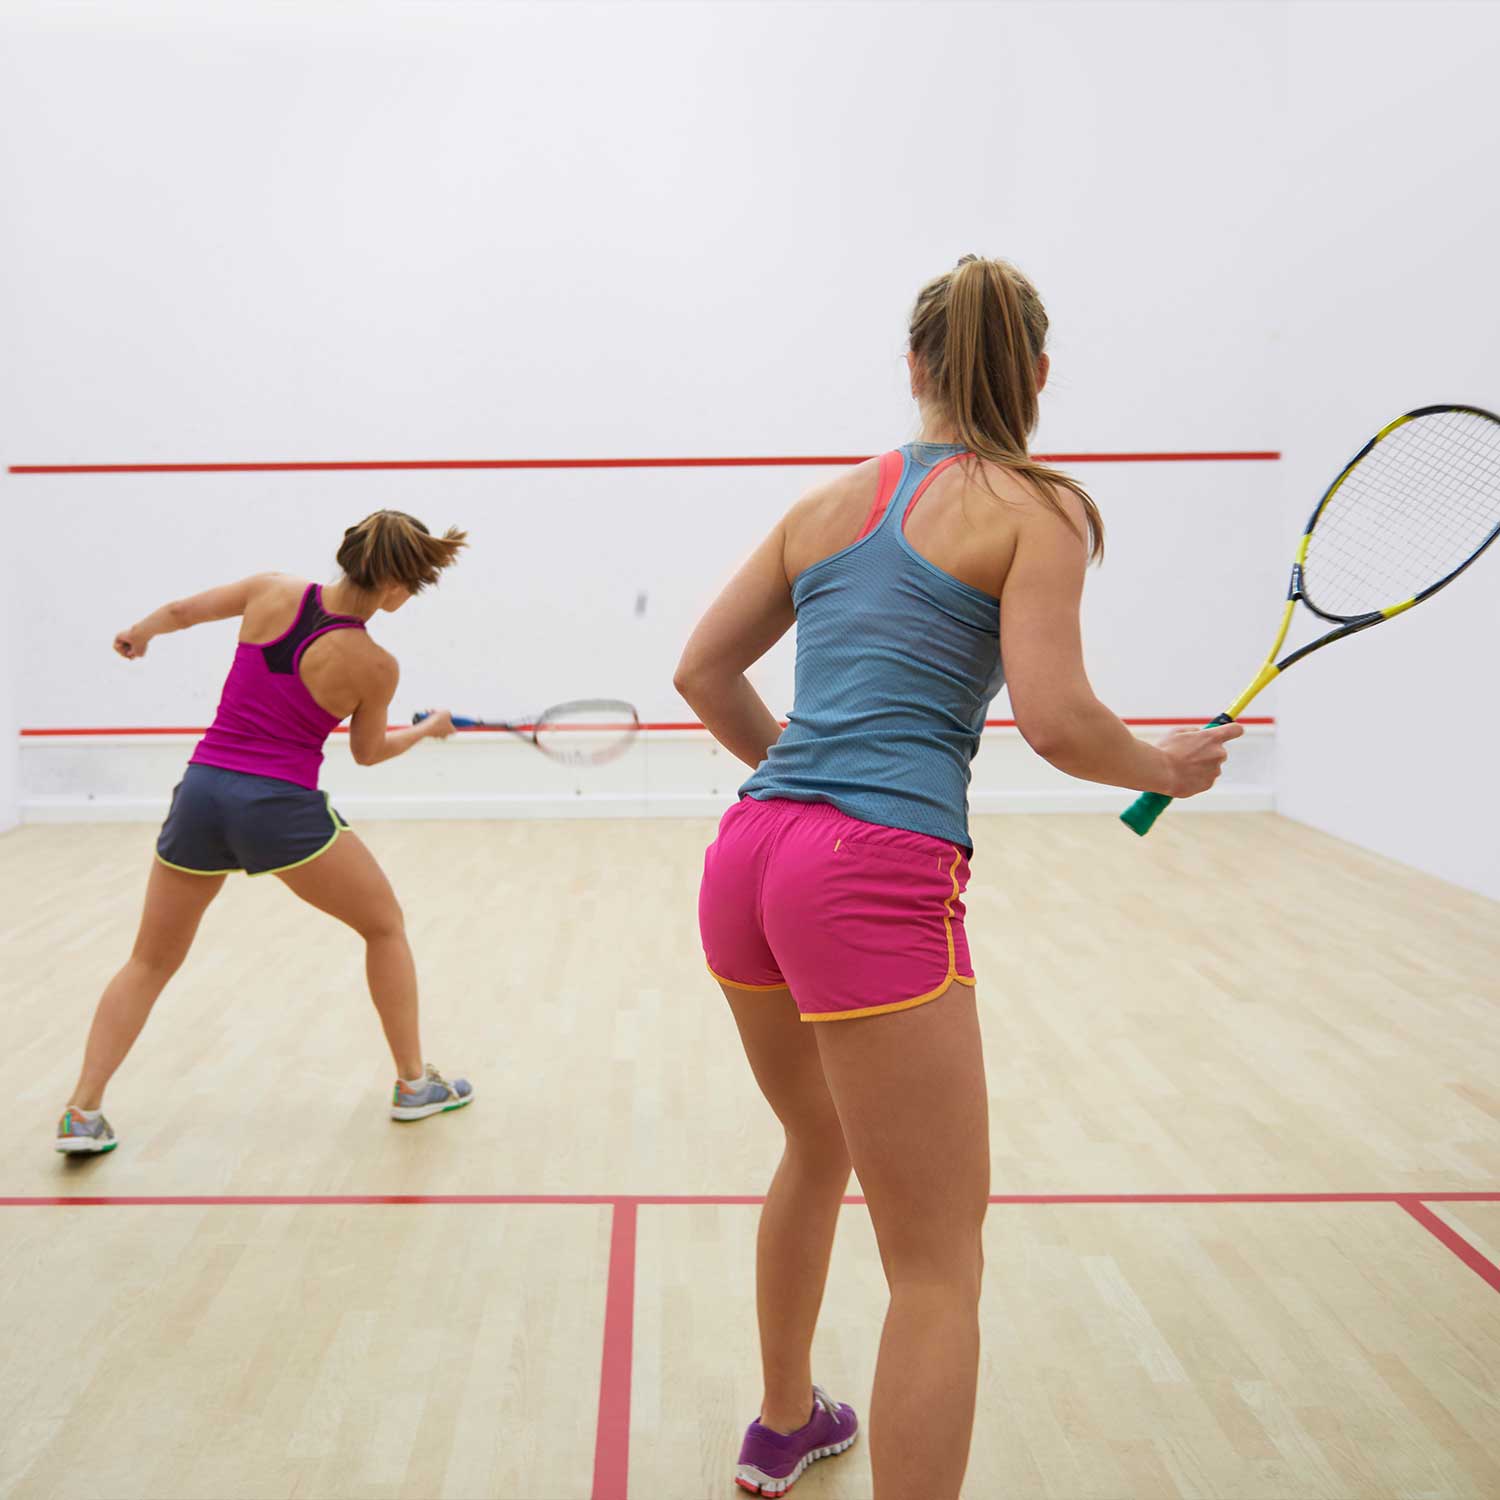 Nets for squash courts